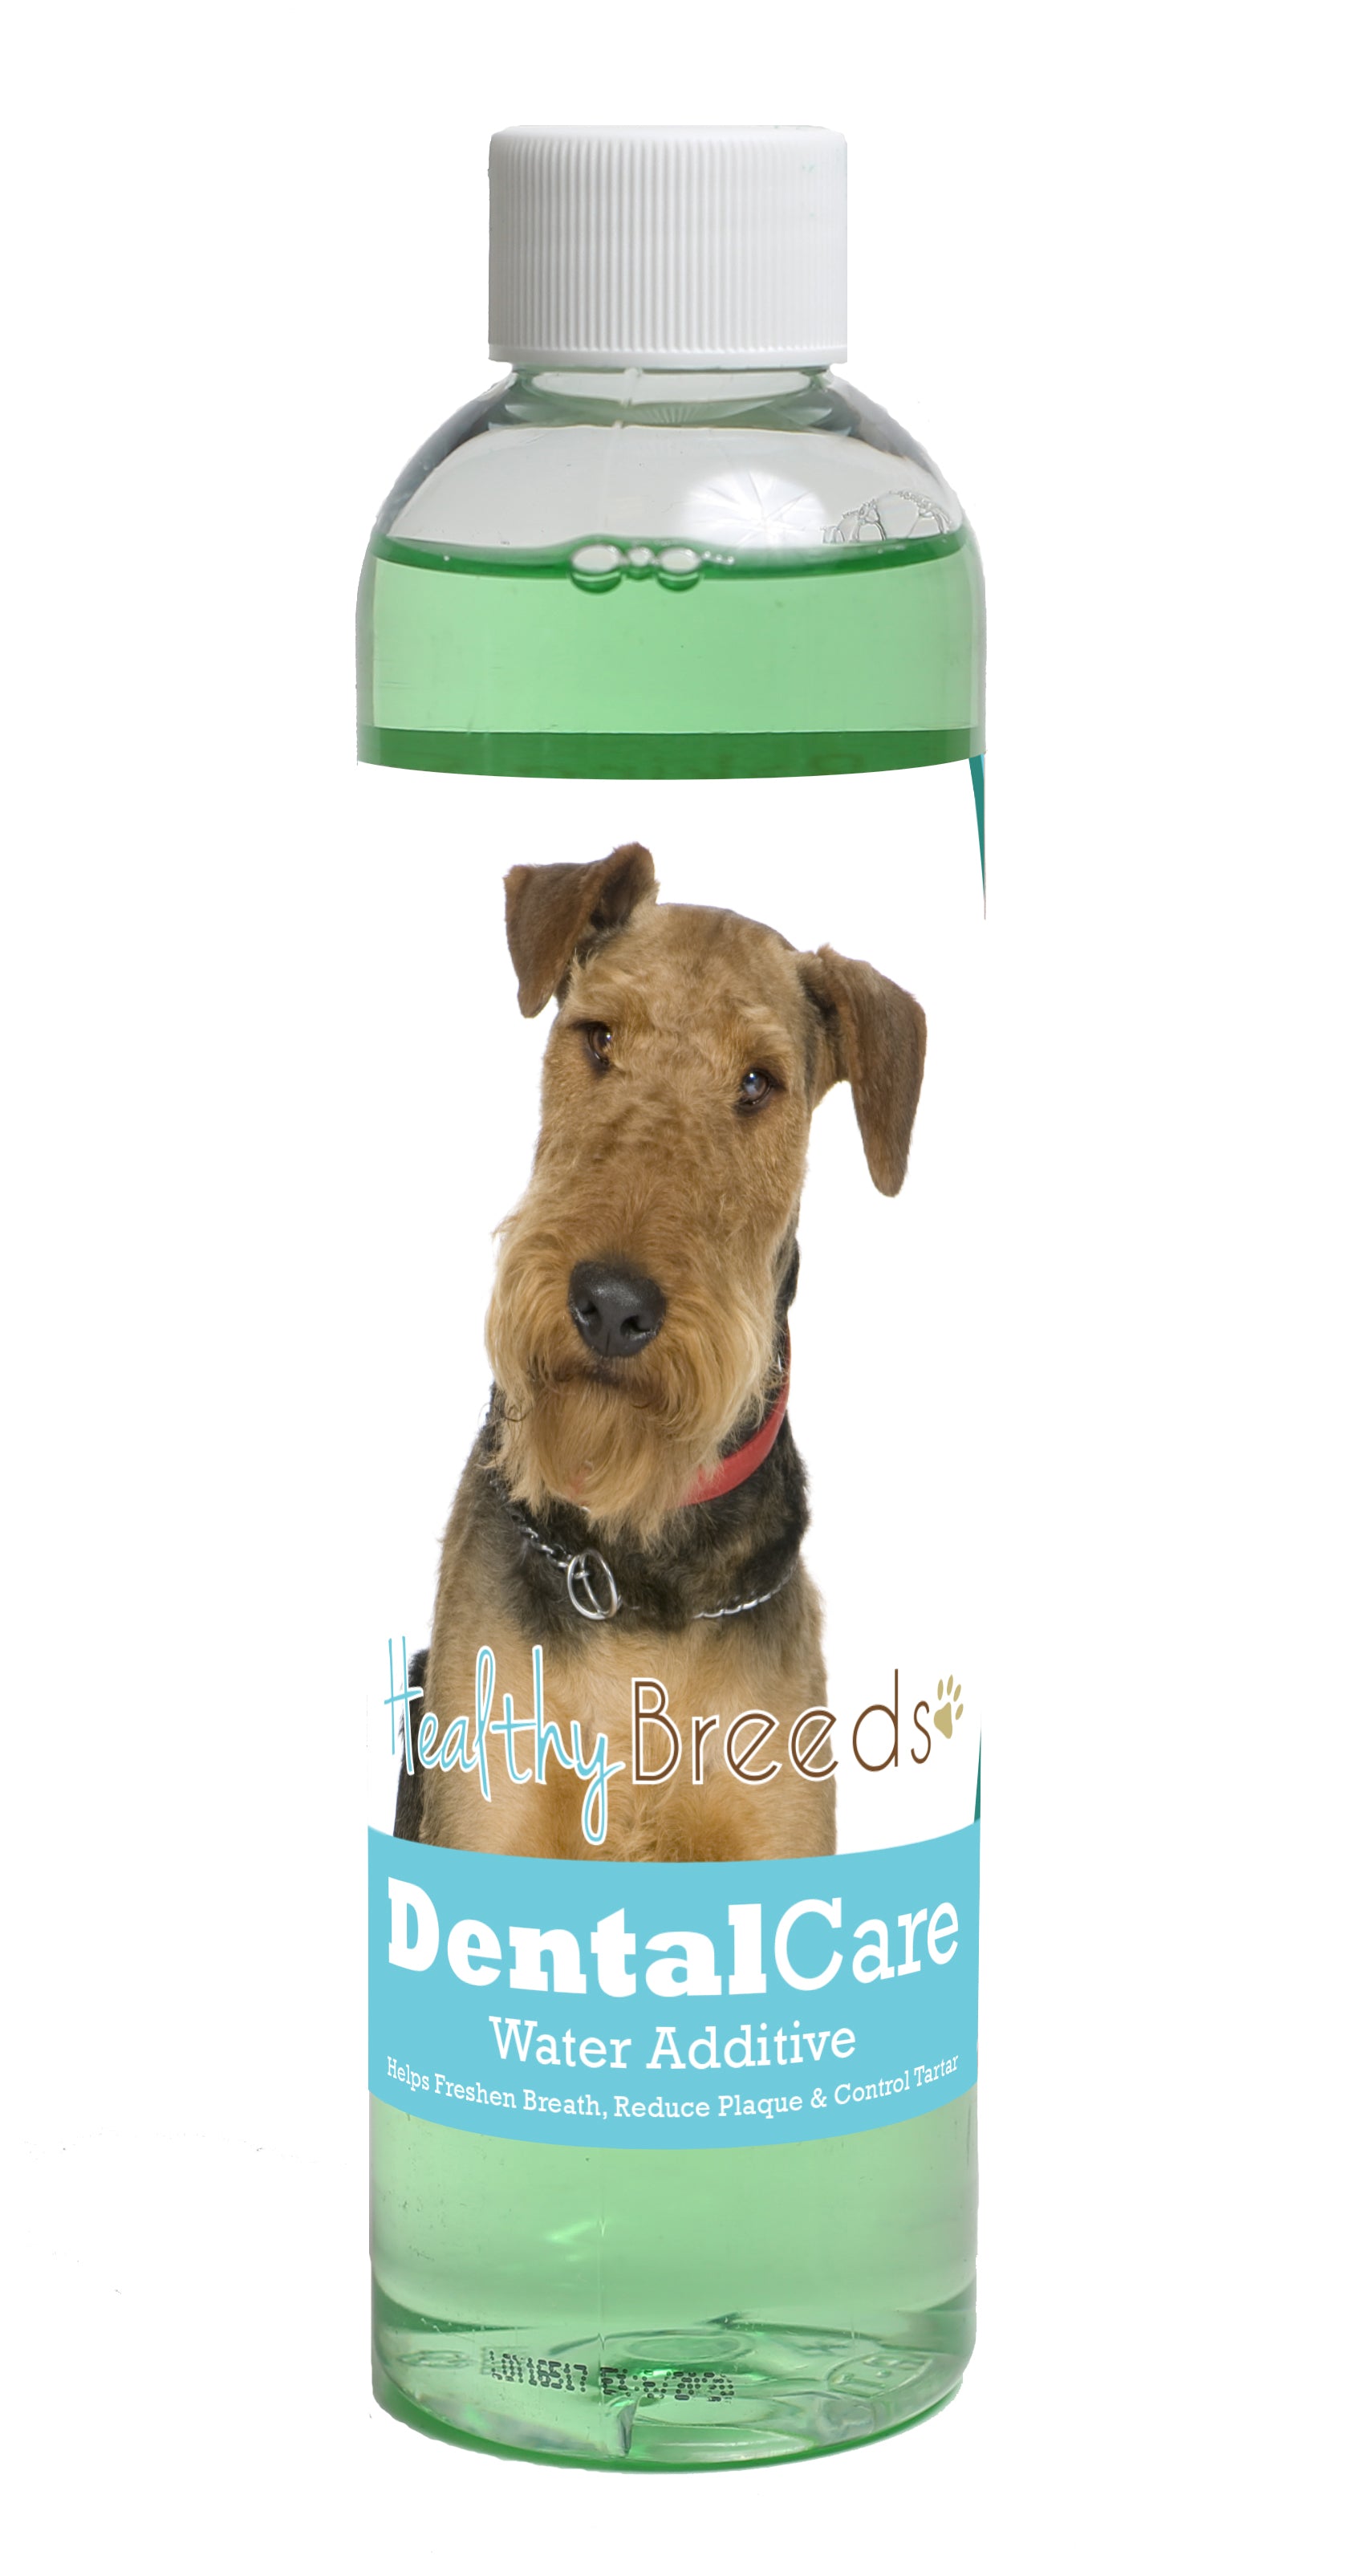 Airedale Terrier Dental Rinse for Dogs 8 oz